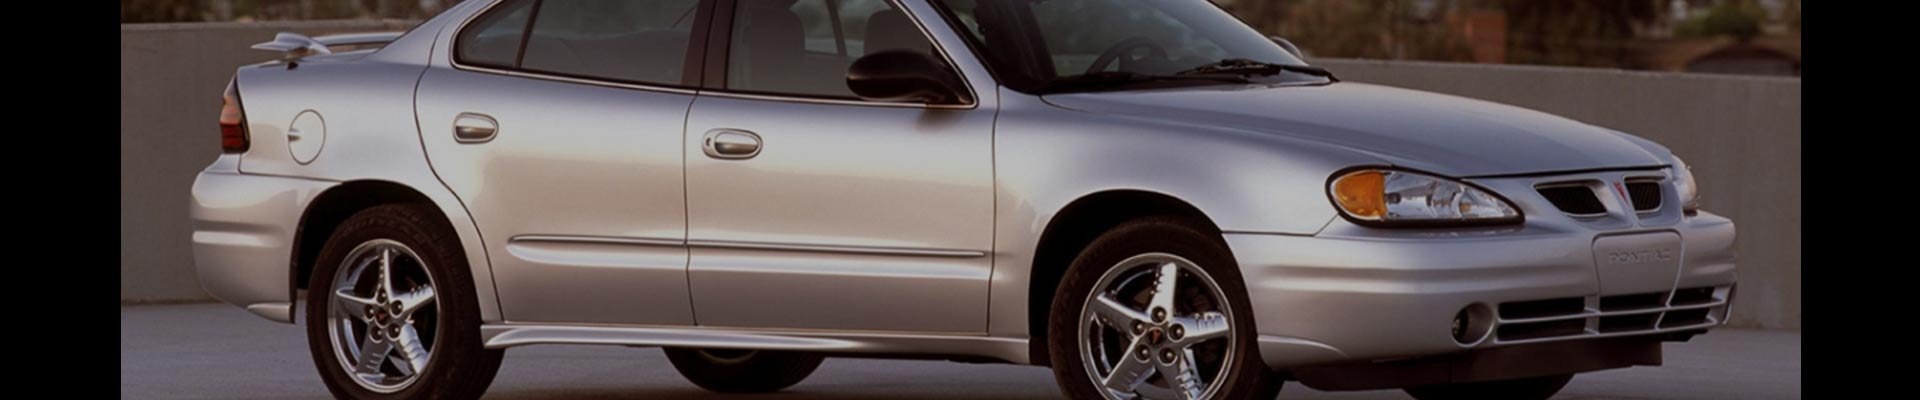 Shop Replacement and OEM 2000 Pontiac Grand Am Parts with Discounted Price on the Net